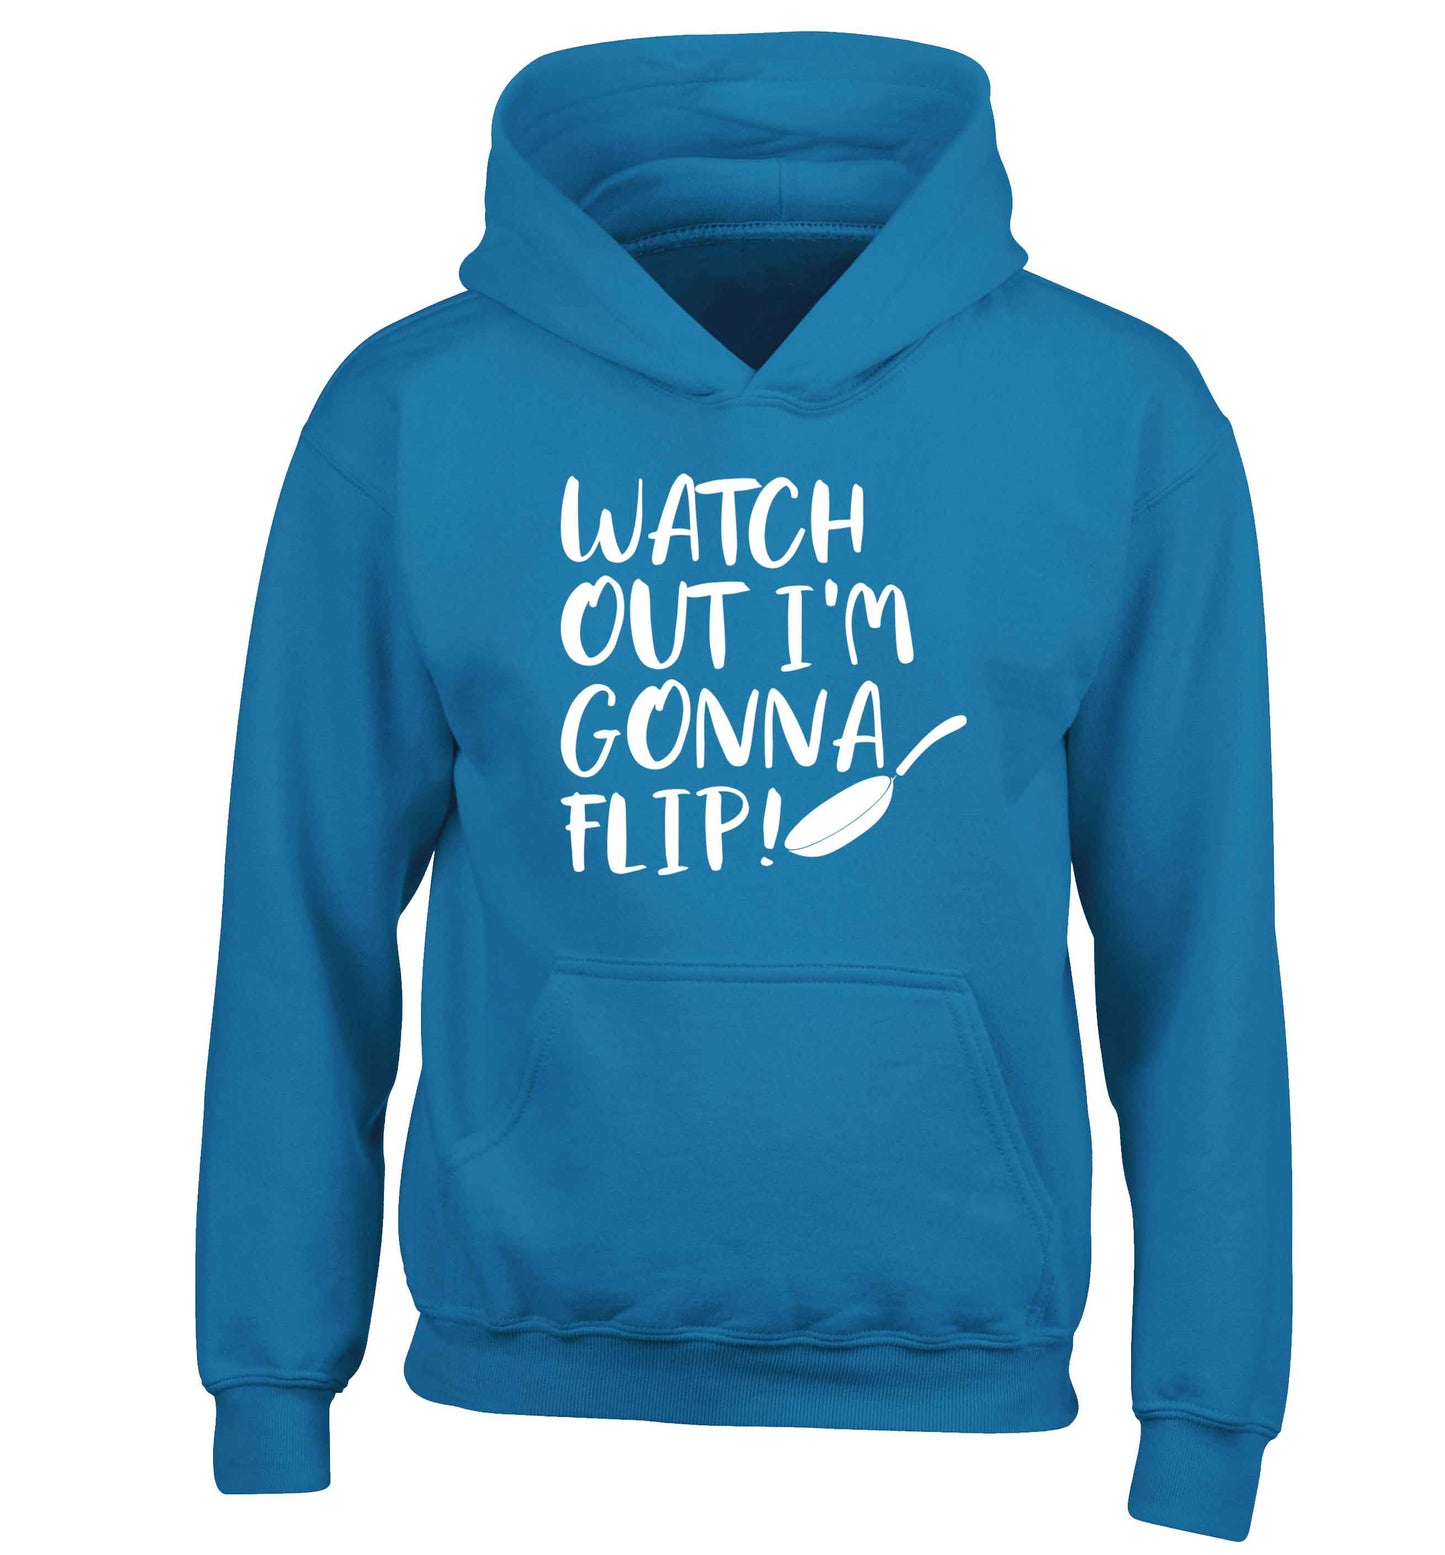 Watch out I'm gonna flip! children's blue hoodie 12-13 Years